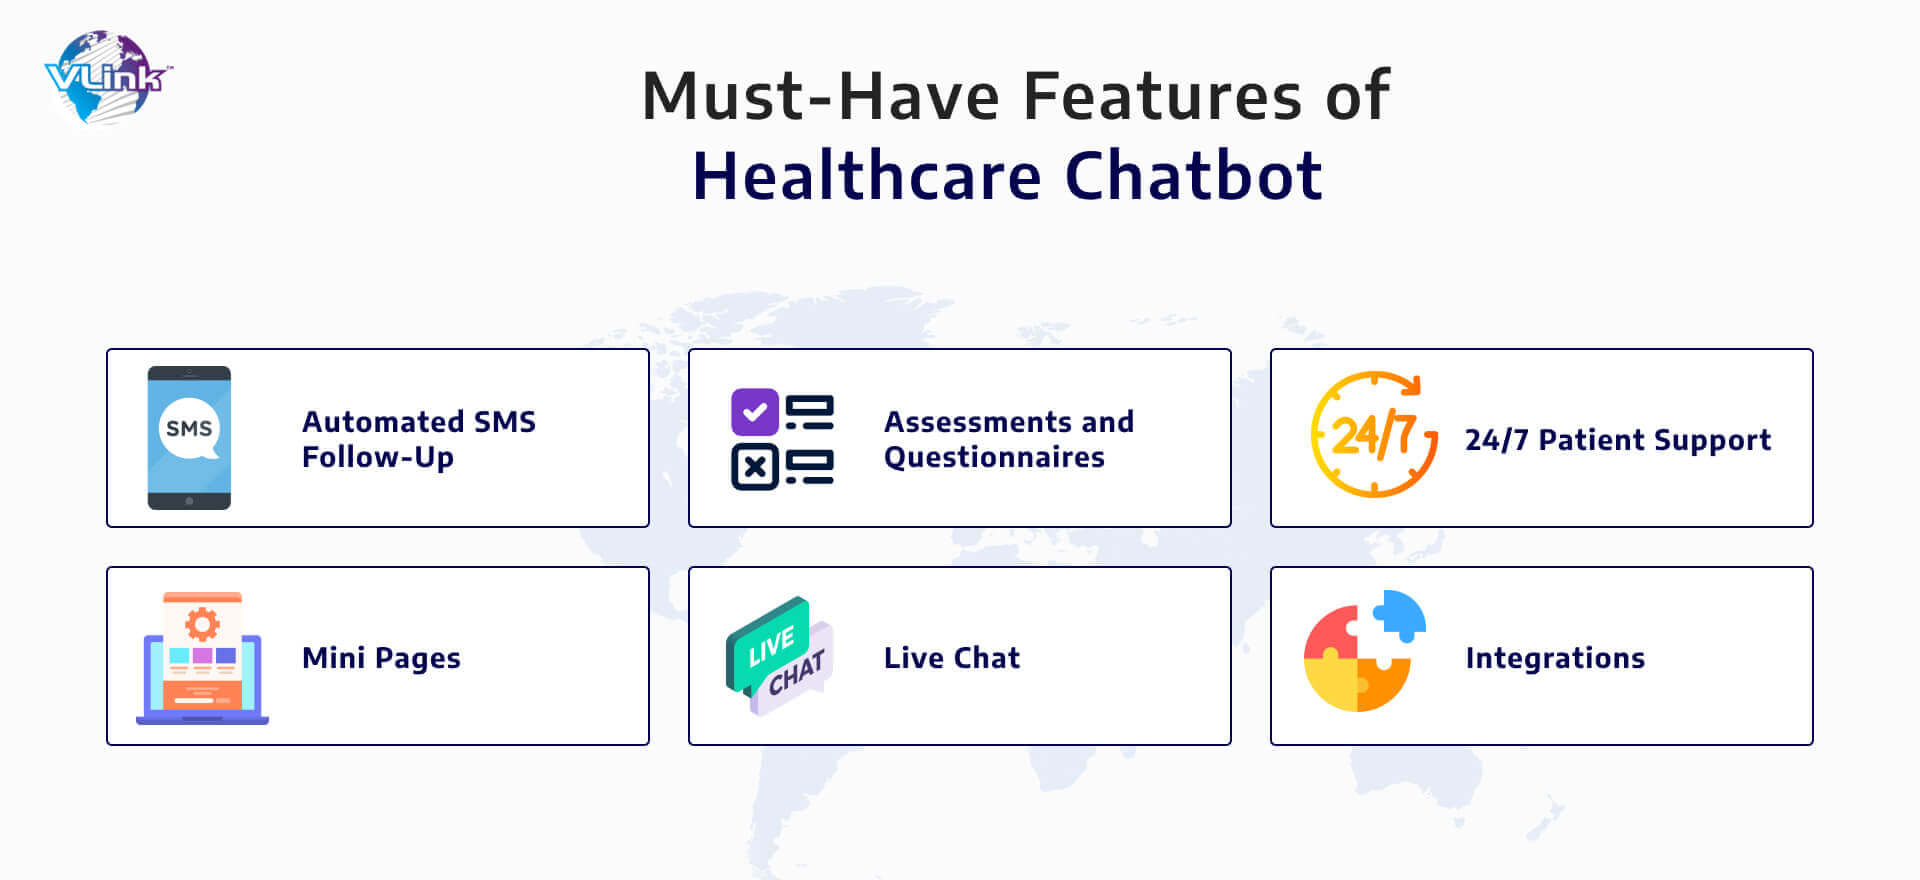 Must Have Features of Healthcare Chatbot.jpg